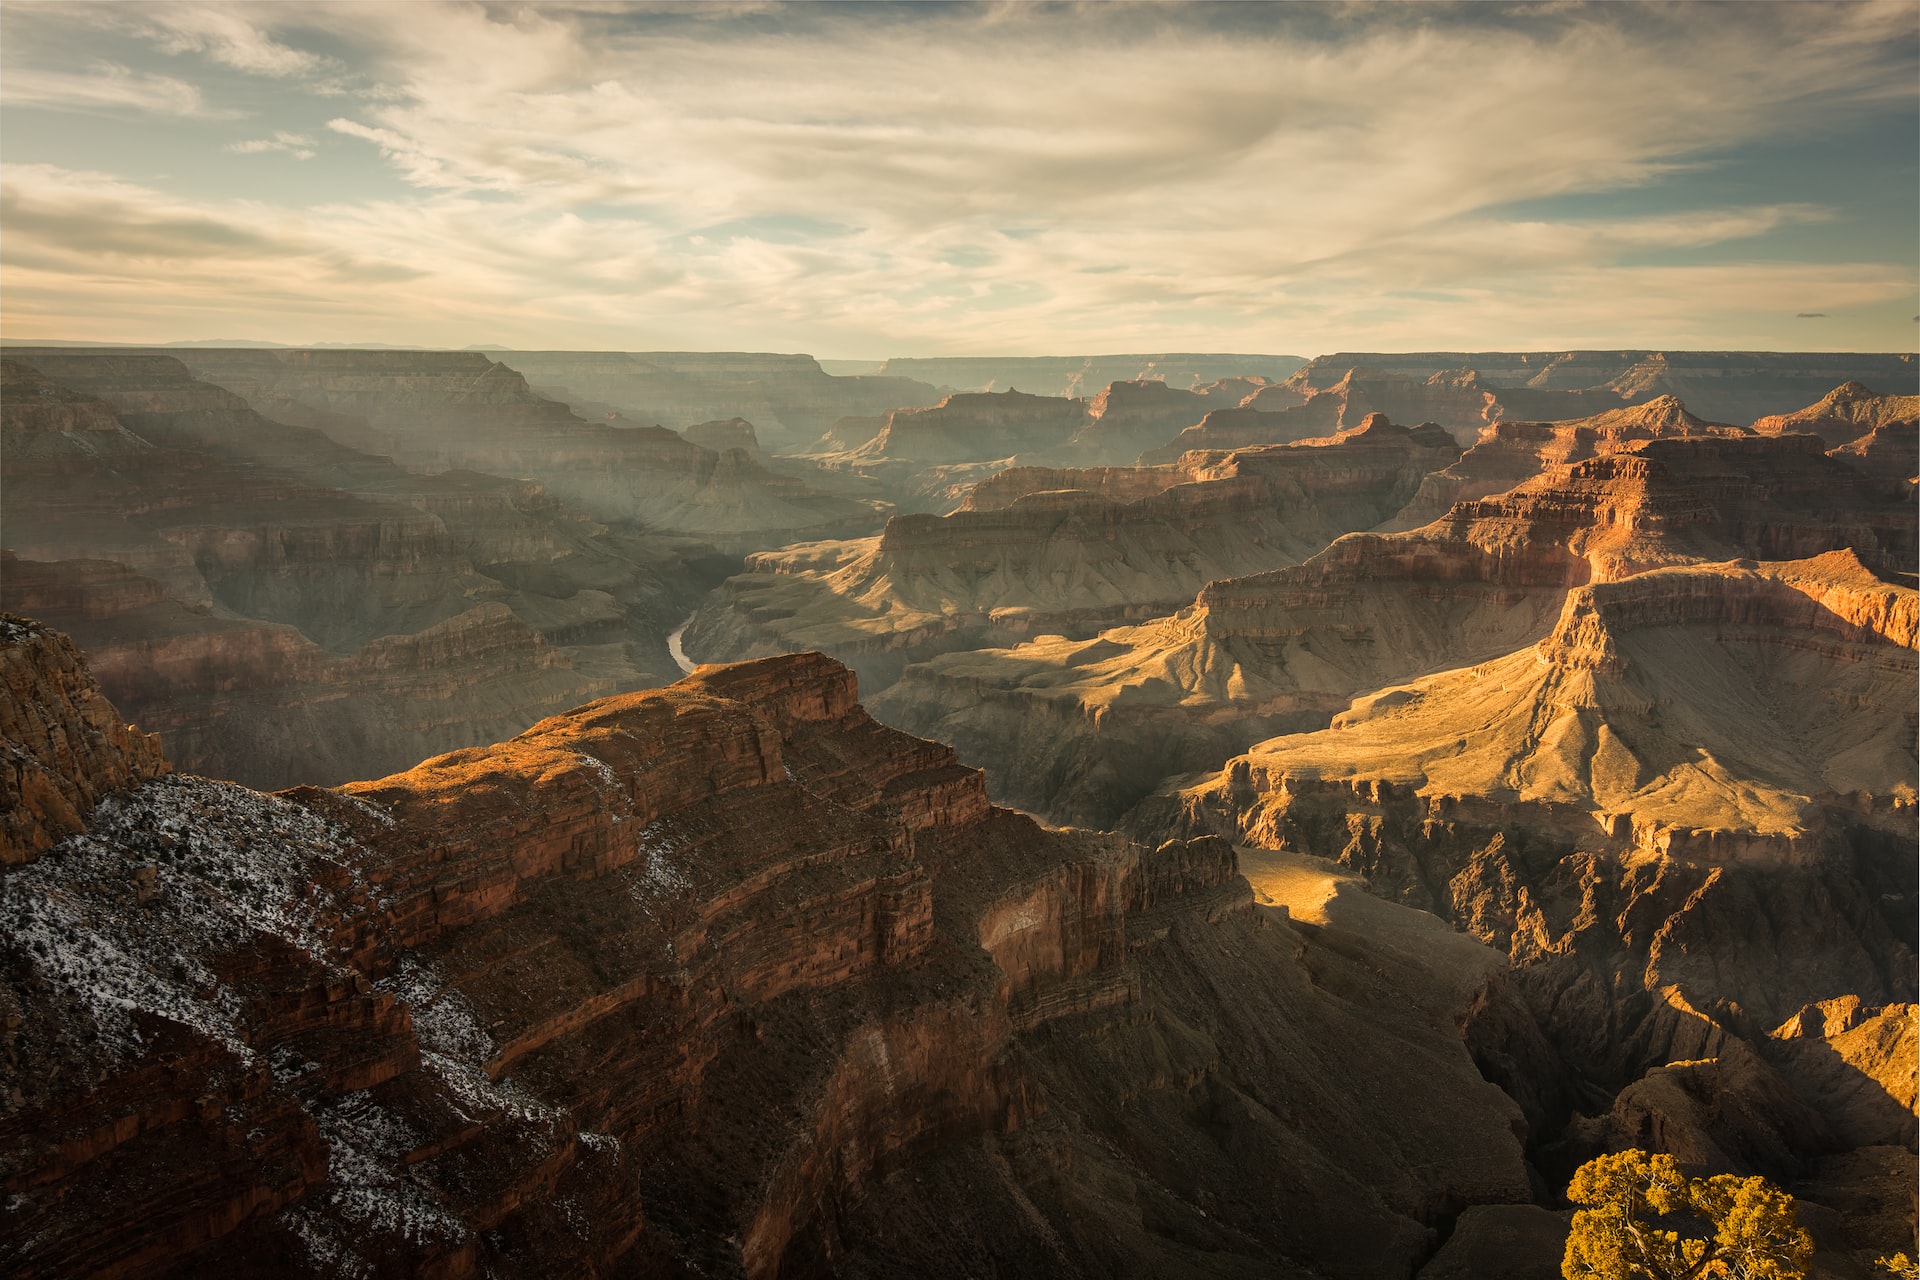 The unending sweeping vistas found in Grand Canyon.